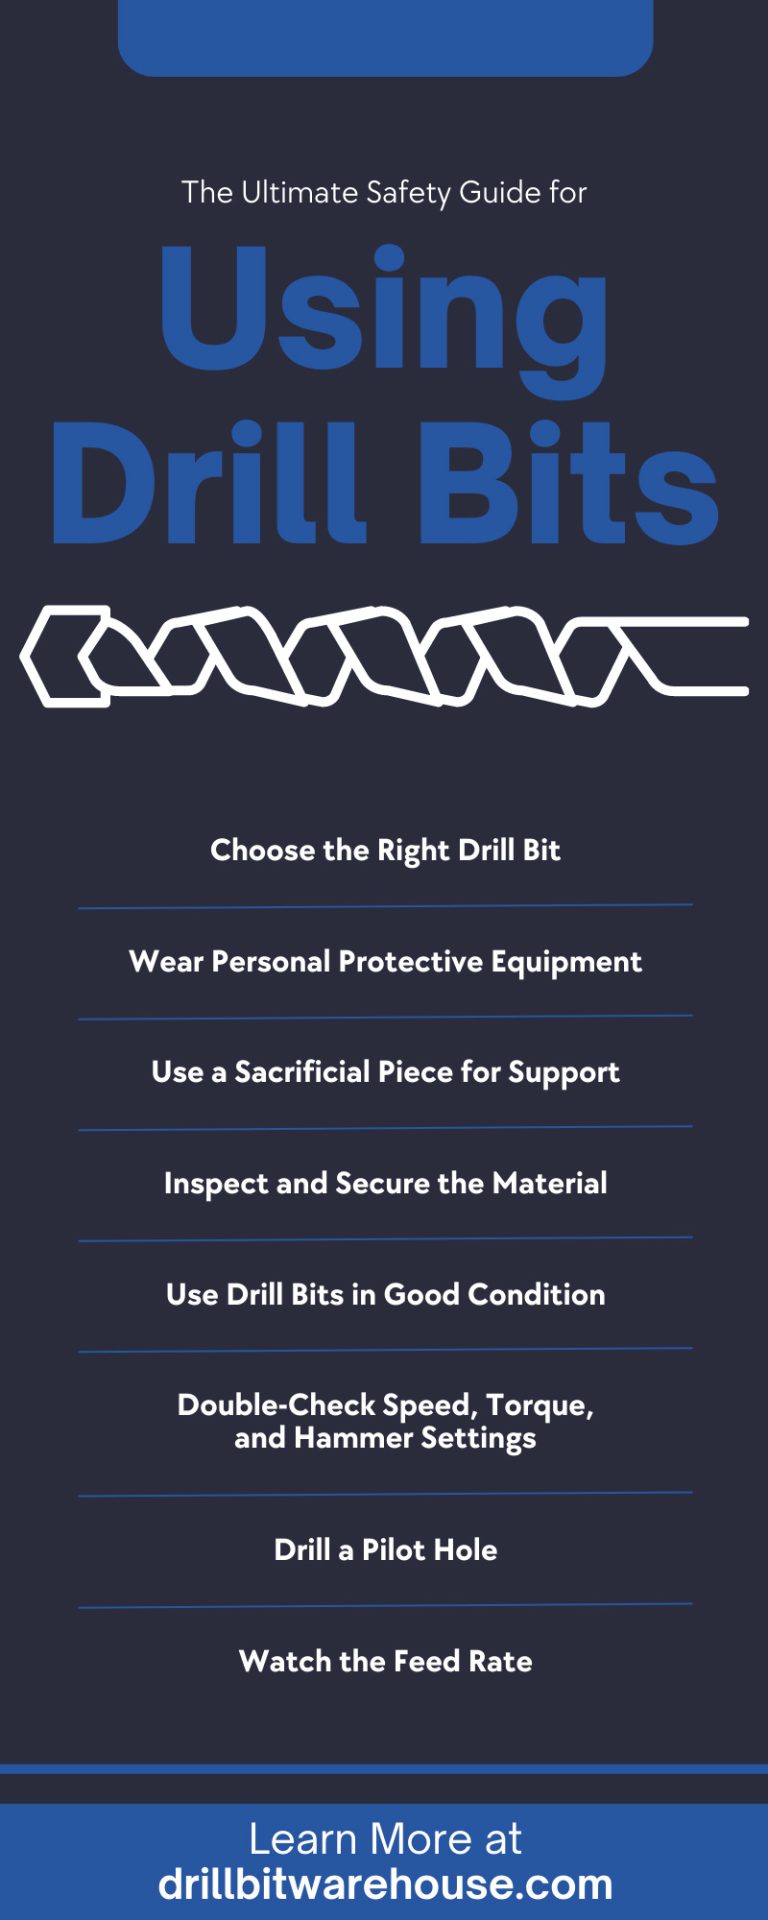 The Ultimate Safety Guide for Using Drill Bits
